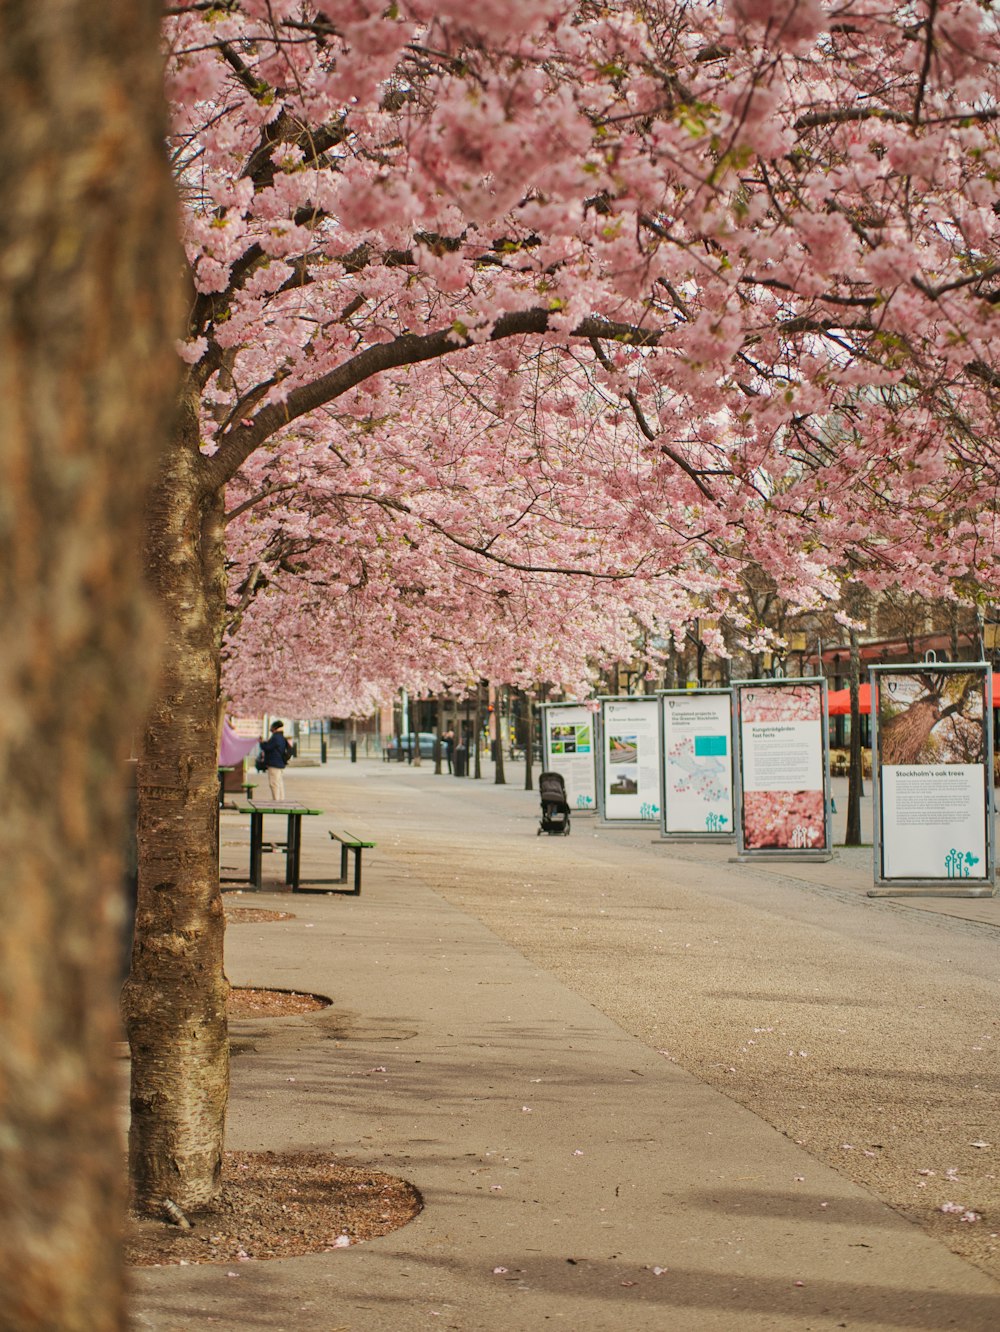 a street lined with trees with pink flowers